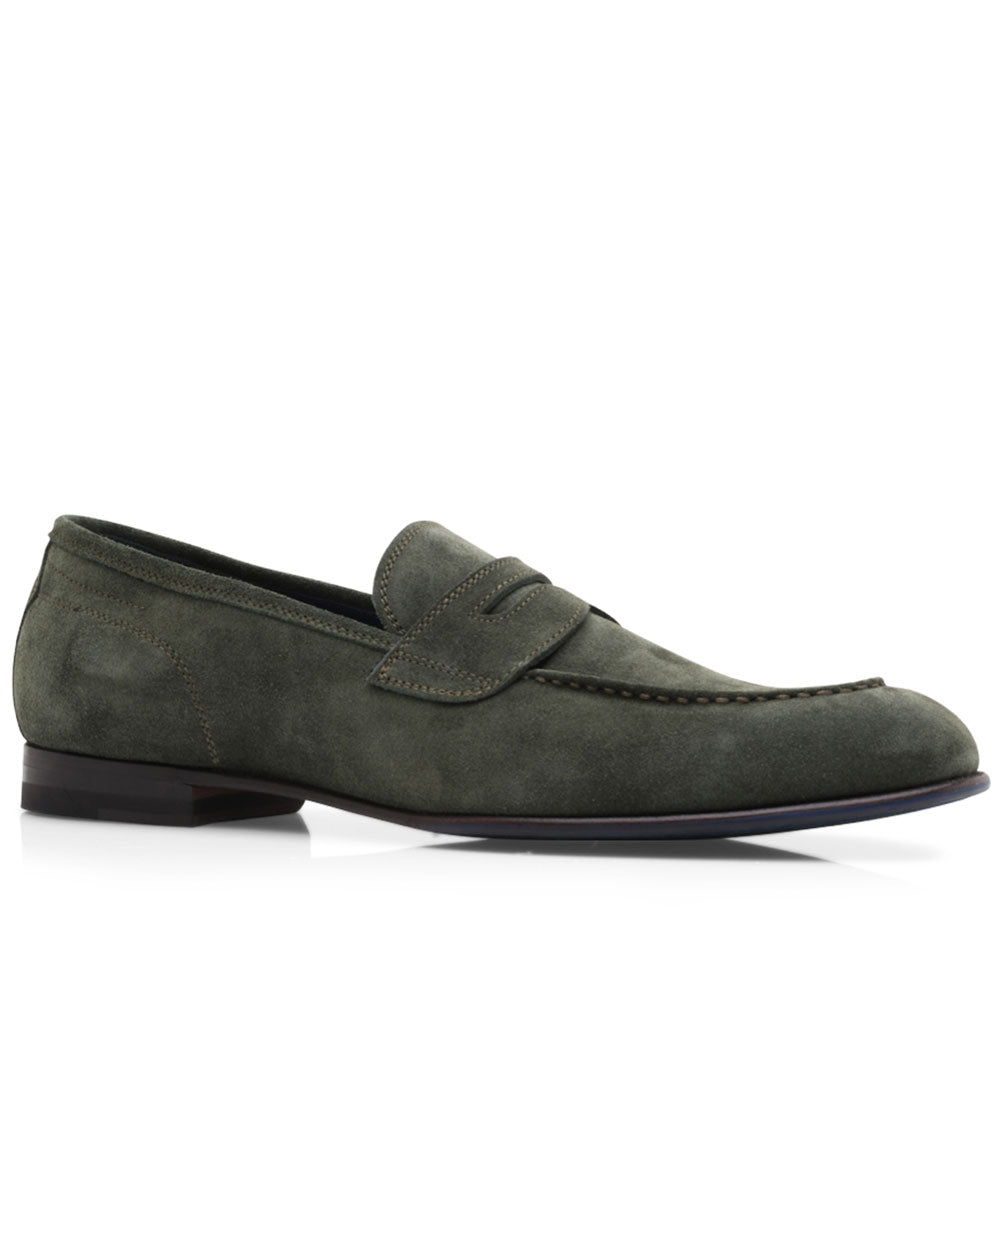 Suede Selva Agata Penny Loafer in Forest Green